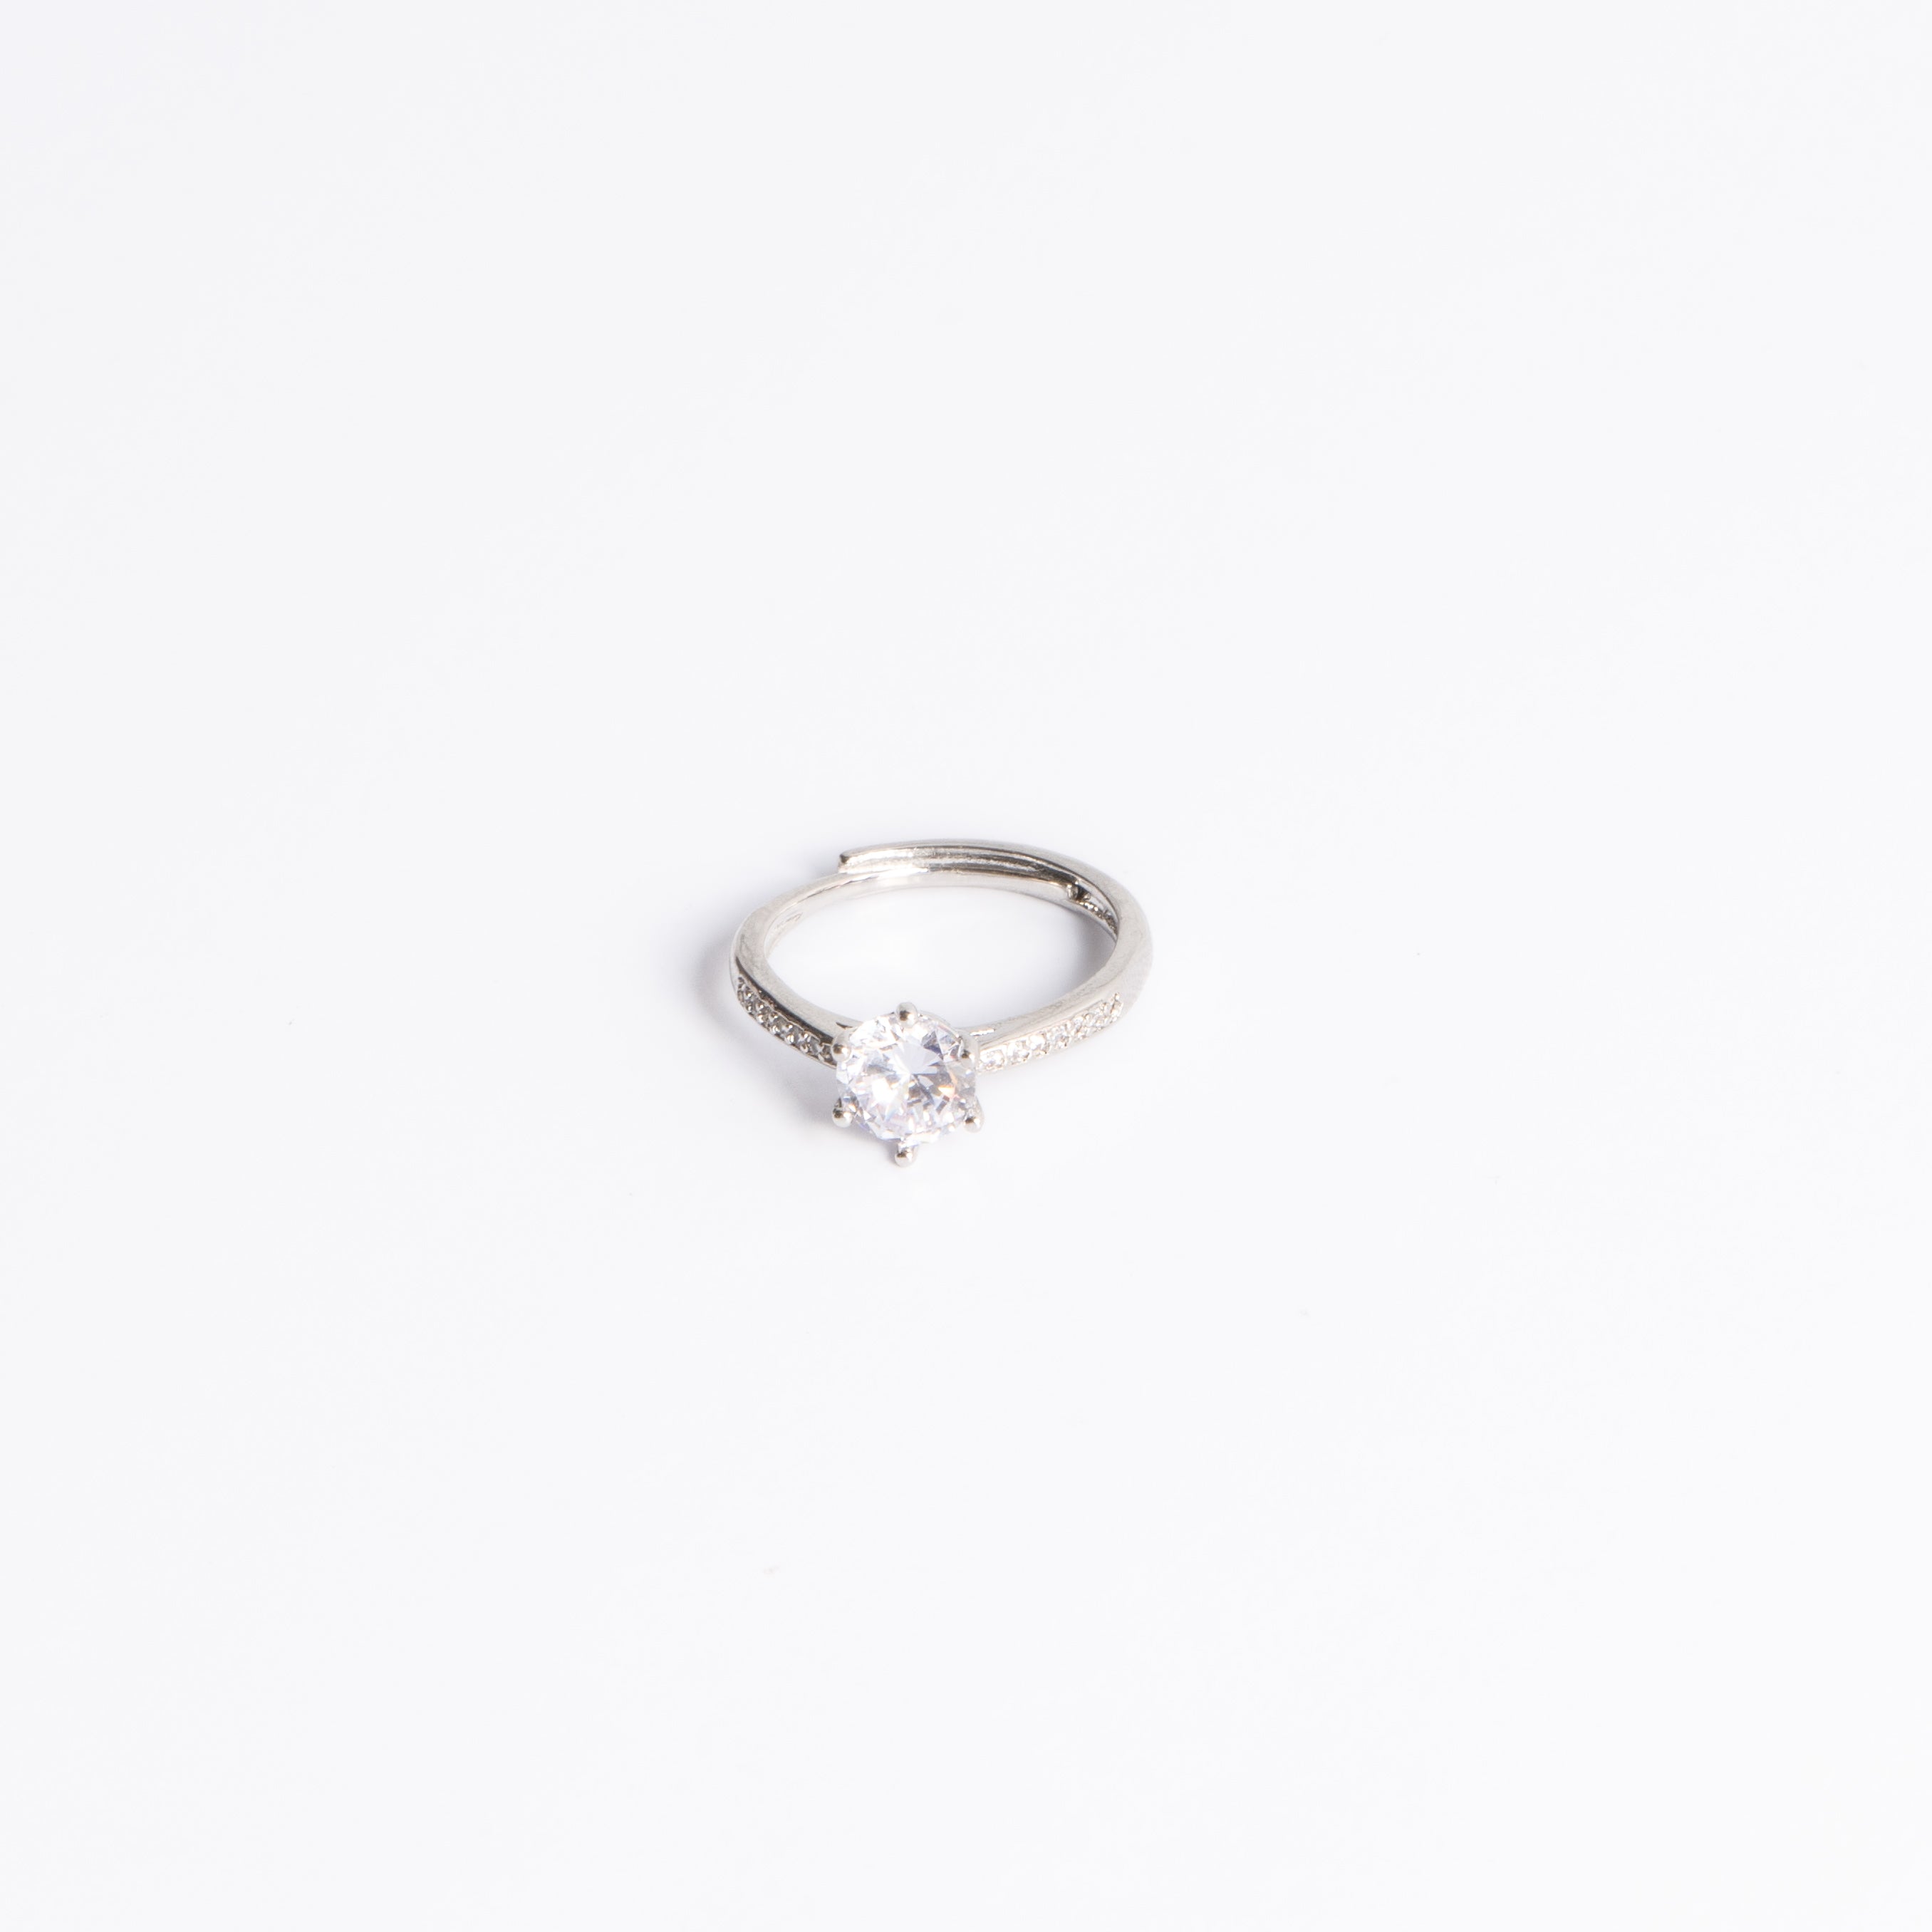 SILVER SOLITAIRE RING